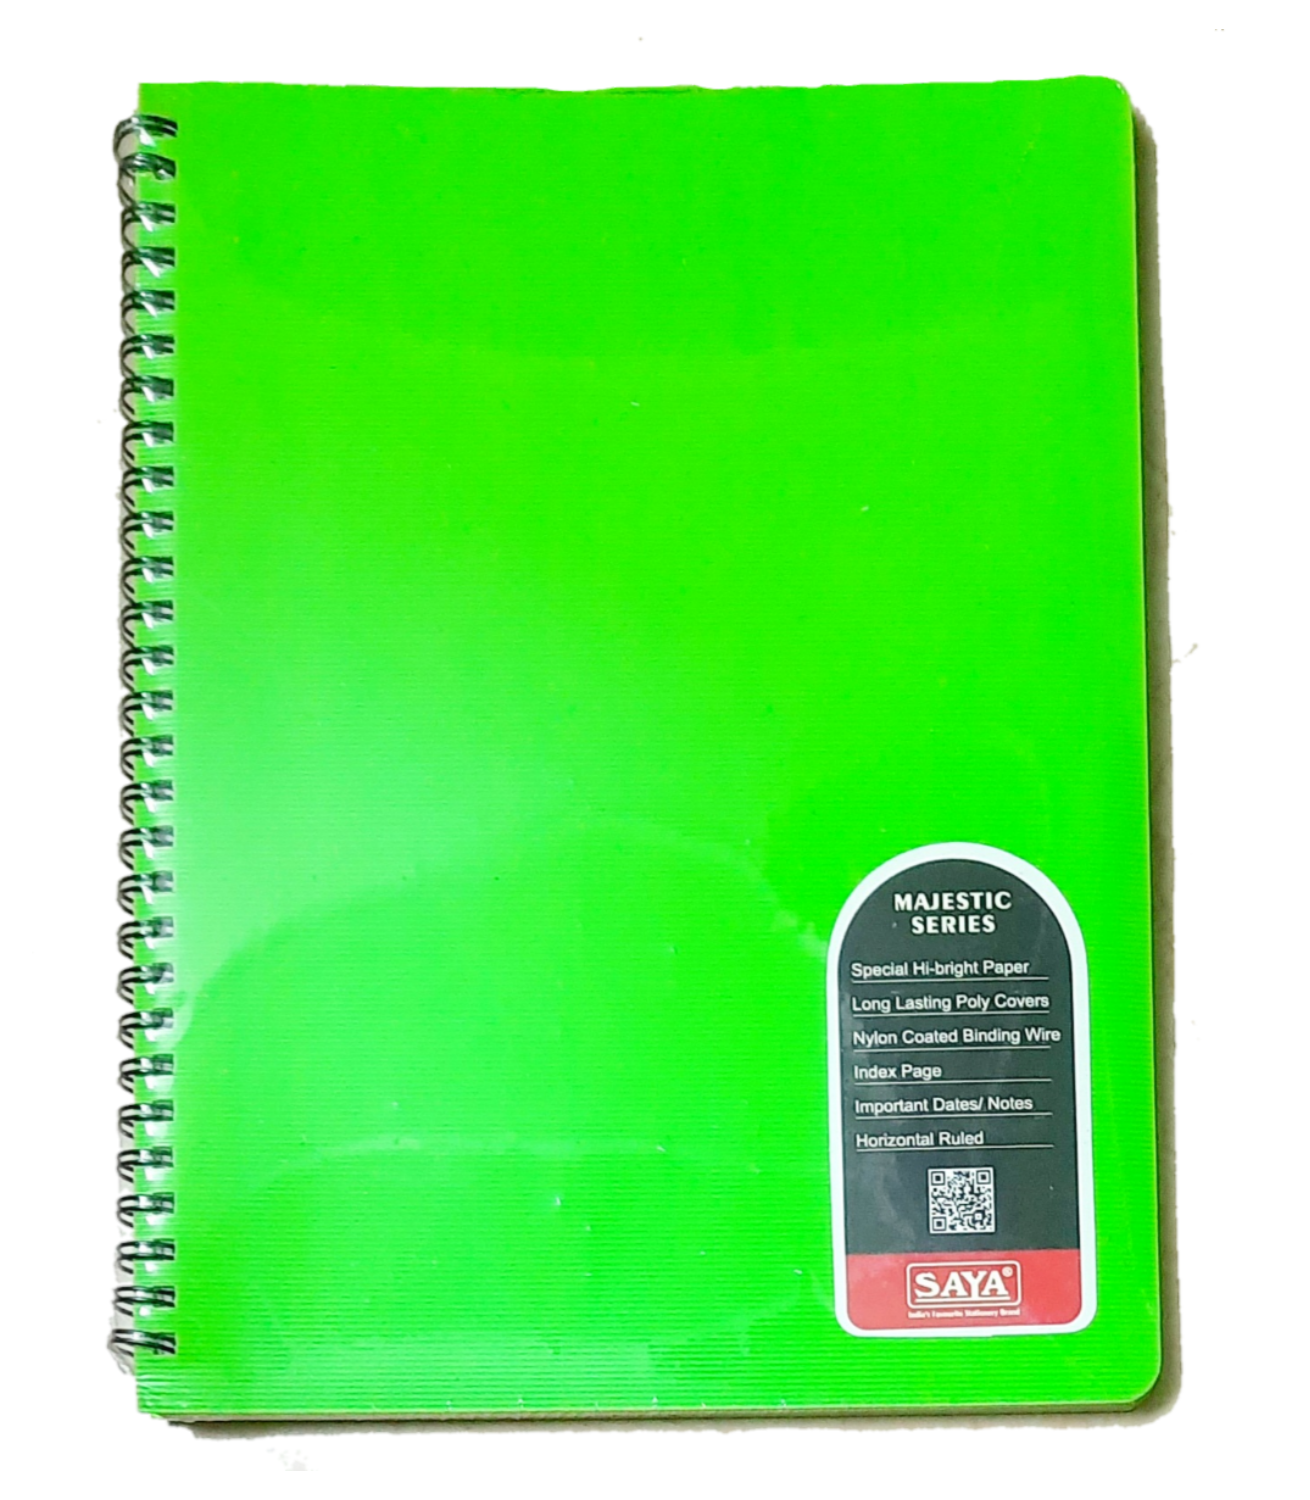 Saya Spiral Notebook, Majestic Series, Single Line, 160 Pages, 25 X 17.6 cm, Pack of 1